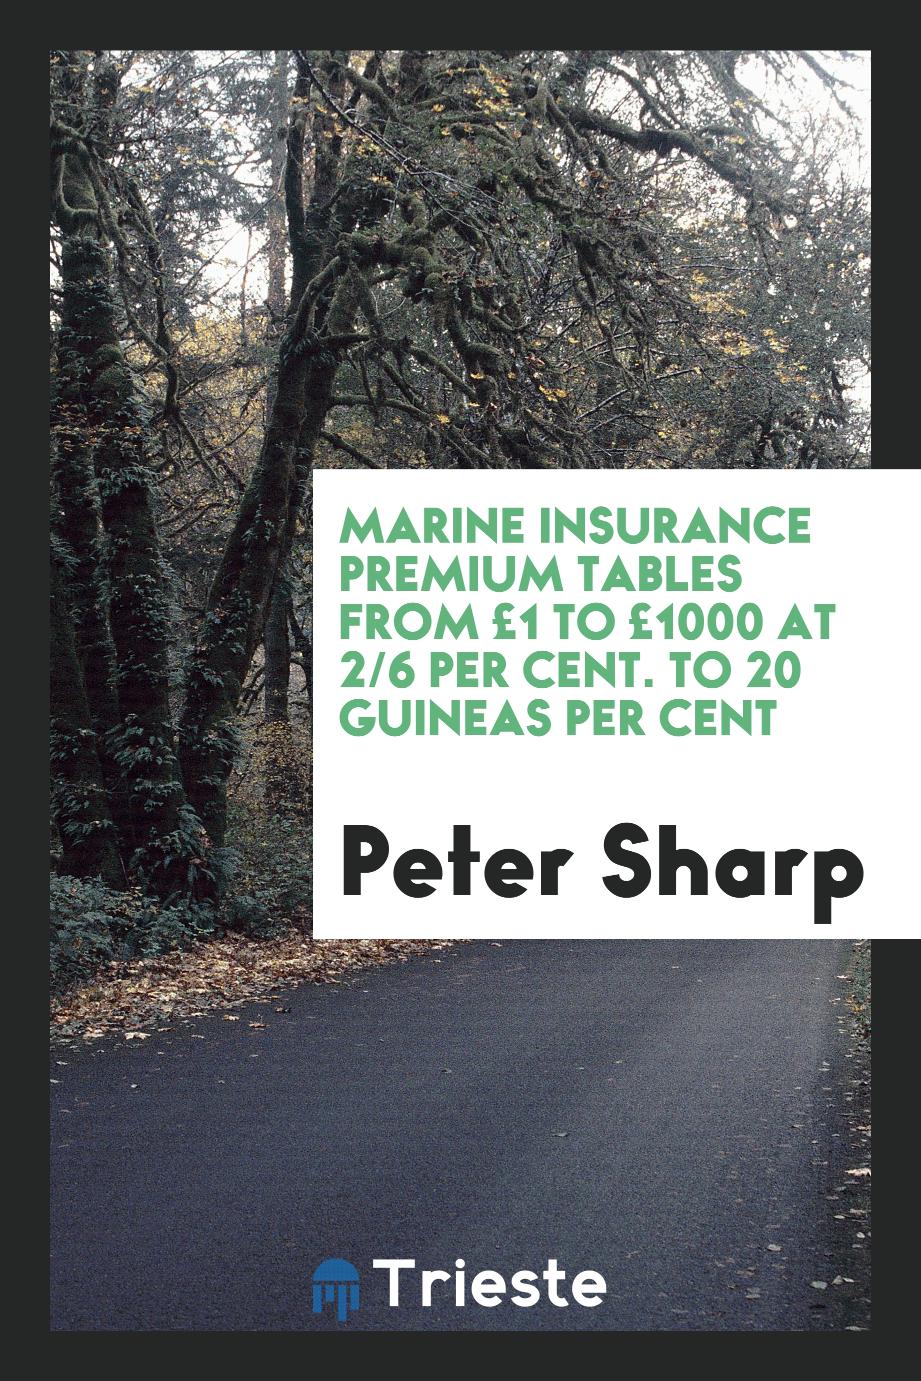 Marine insurance premium tables from £1 to £1000 at 2/6 per cent. to 20 guineas per cent